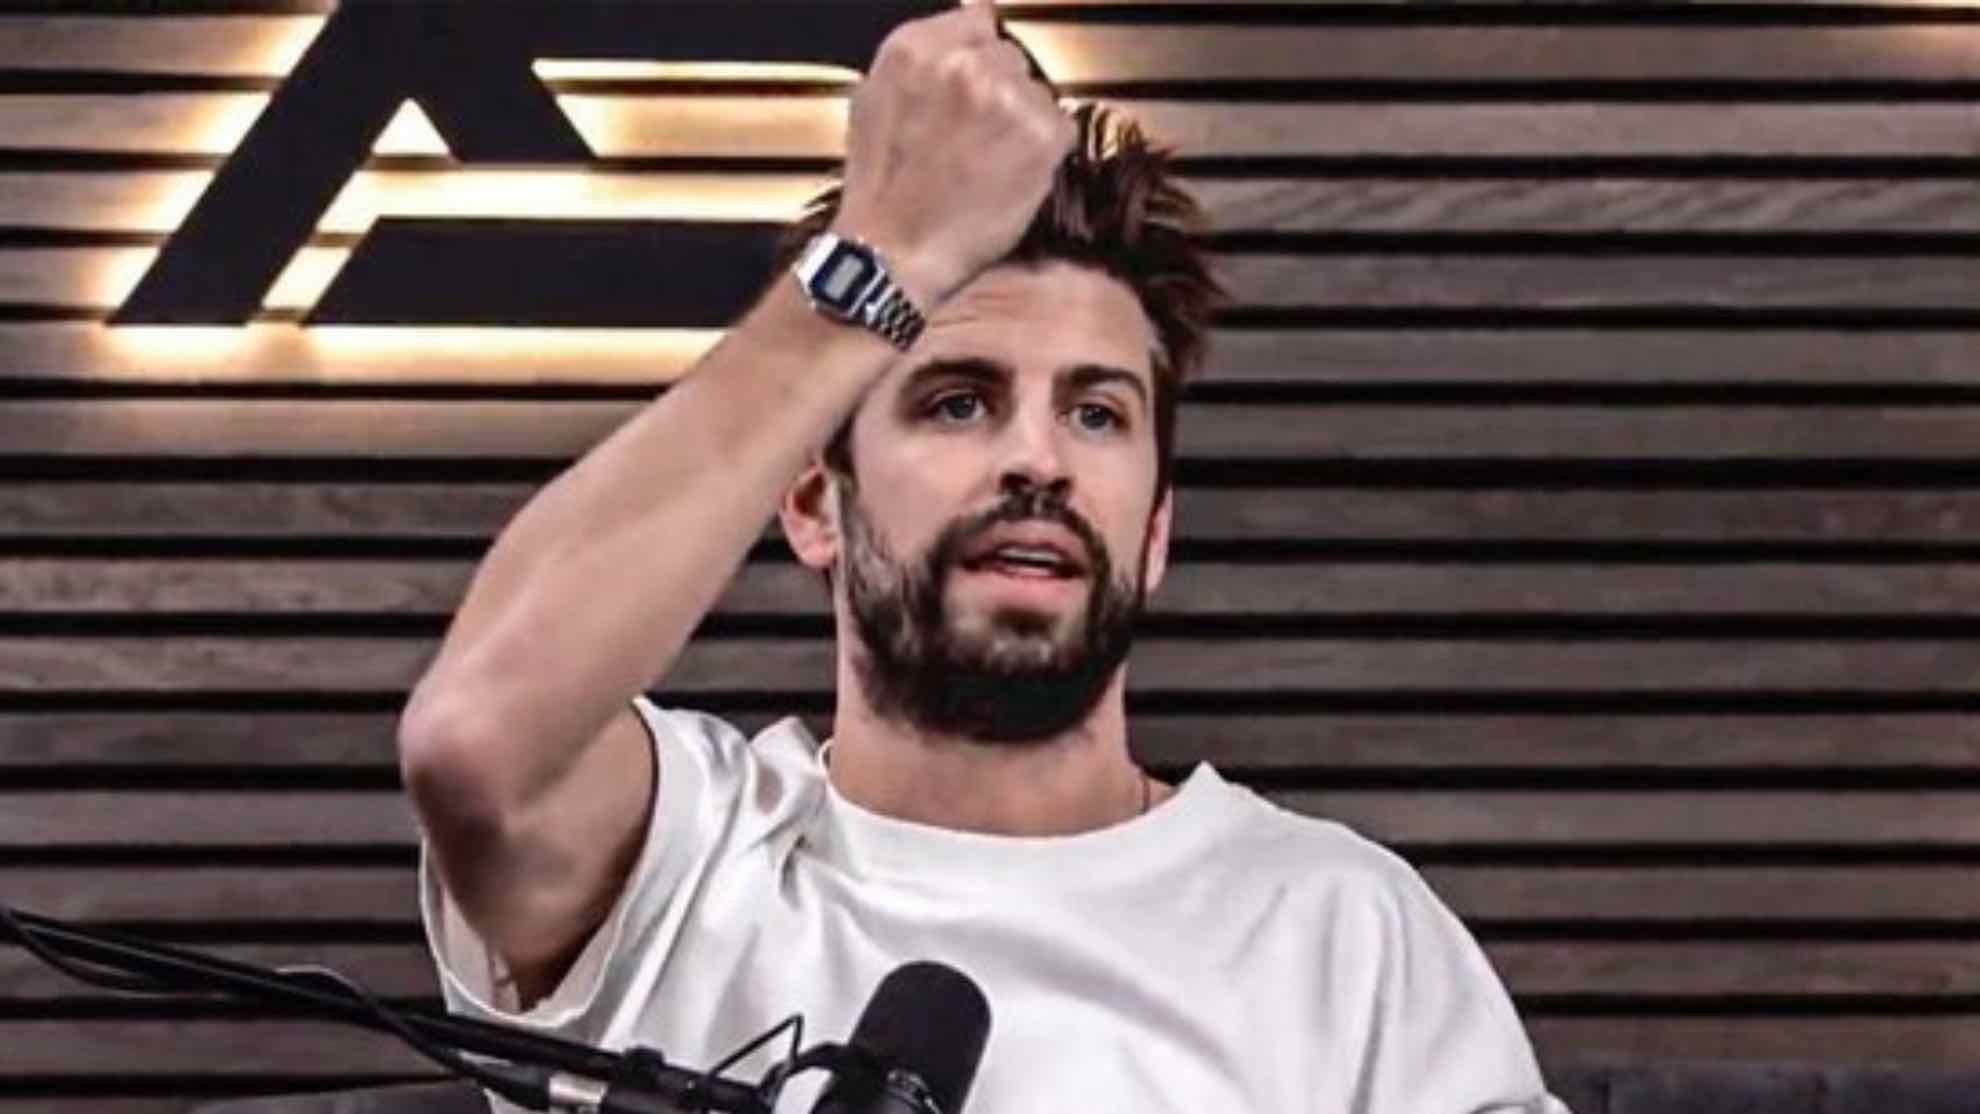 Casio threatens Gerard Piqué for lying on his name